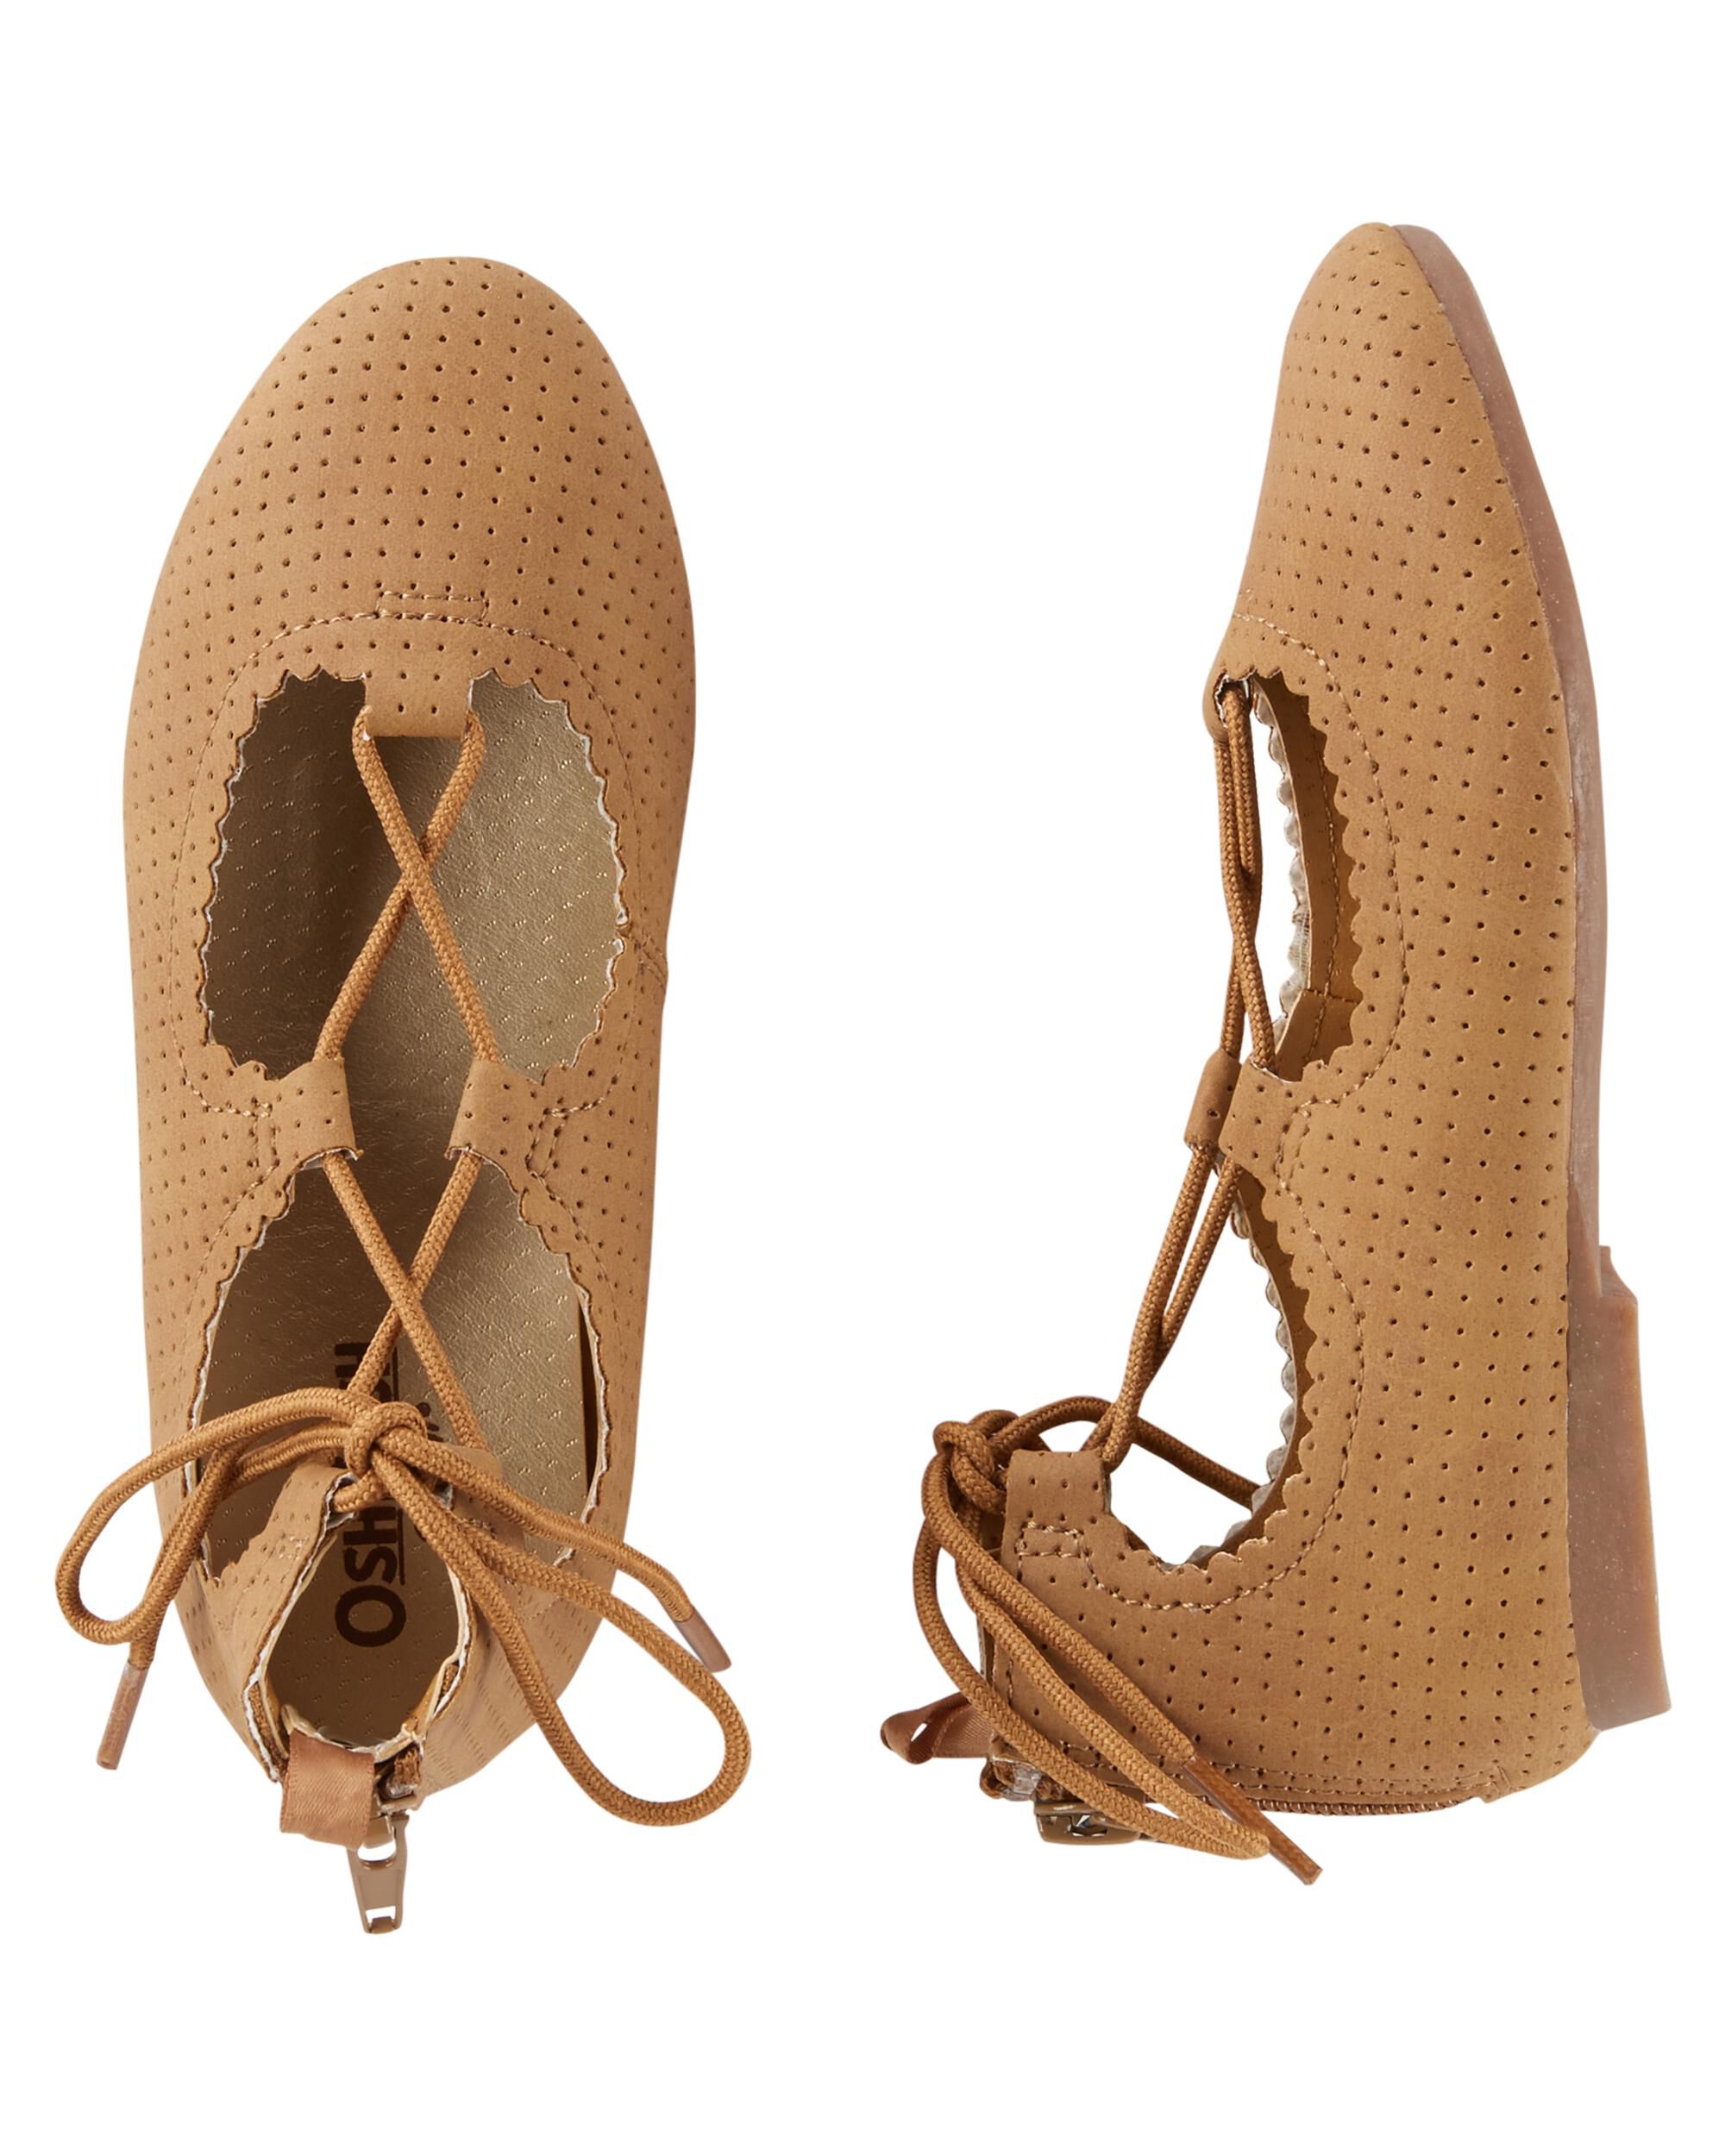 baby lace up ballet shoes